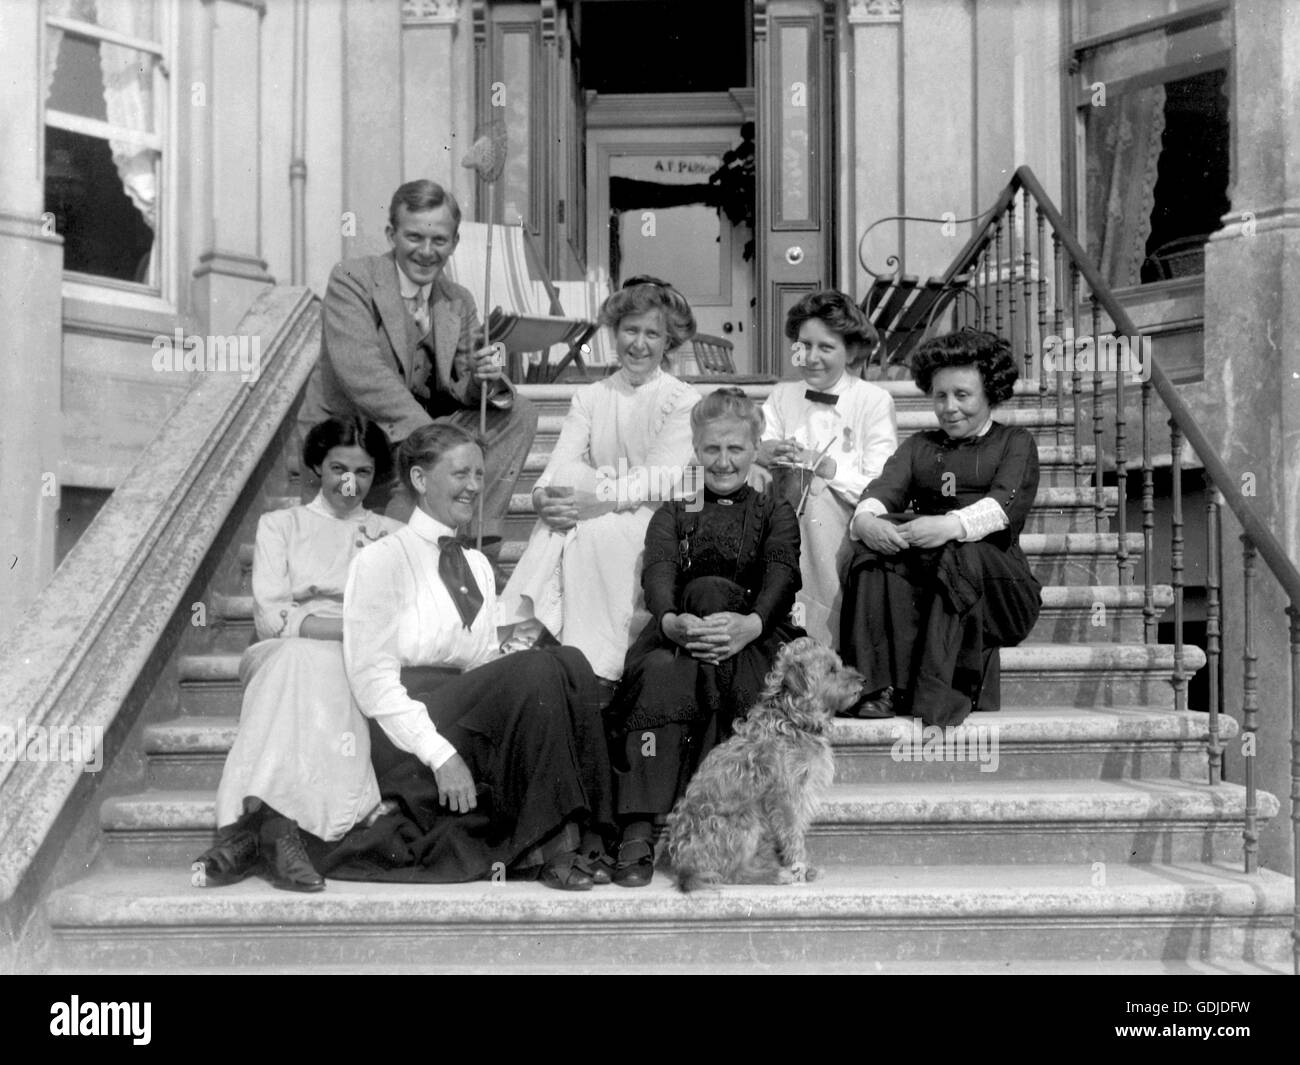 Edwardian post-Victorian era UK with a more informal group photograph of what could be house owners plus staff smiling for the camera or a guest house owner and staff. Note the indifferent terrier dog!  Photo by Tony Henshaw Stock Photo